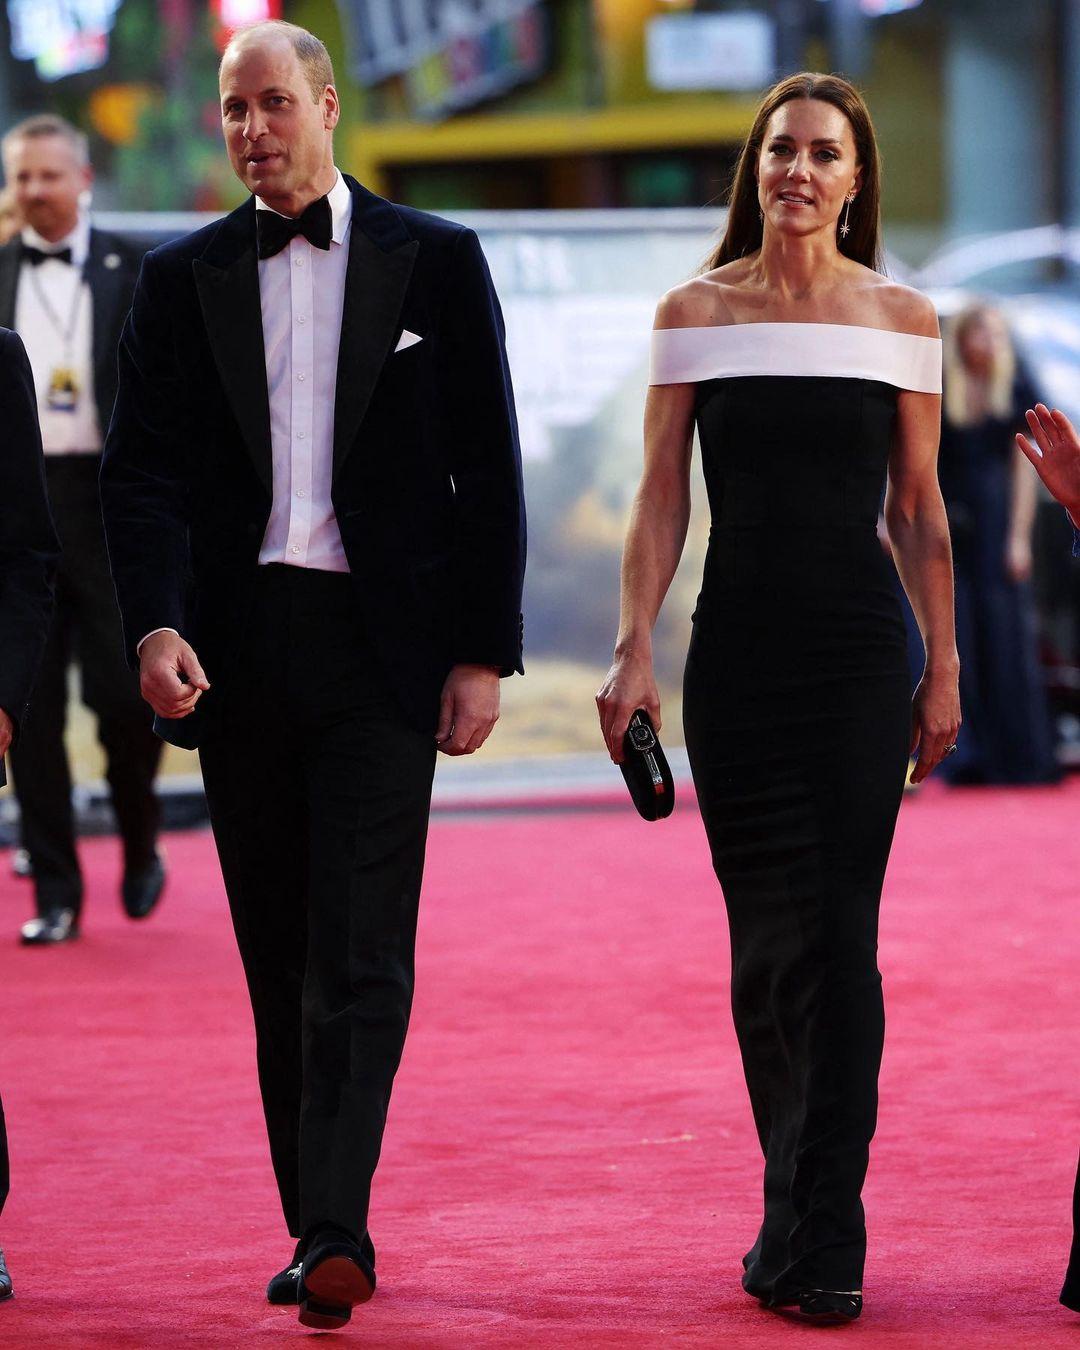 
 Last night the Duke and Duchess of Cambridge attended the Top Gun: Maverick premiere in Leicester Square. Kate wore an off-the-shoulder Roland Mouret dress and the couple walked the red carpet with star of the sequel, Tom Cruise. 
 